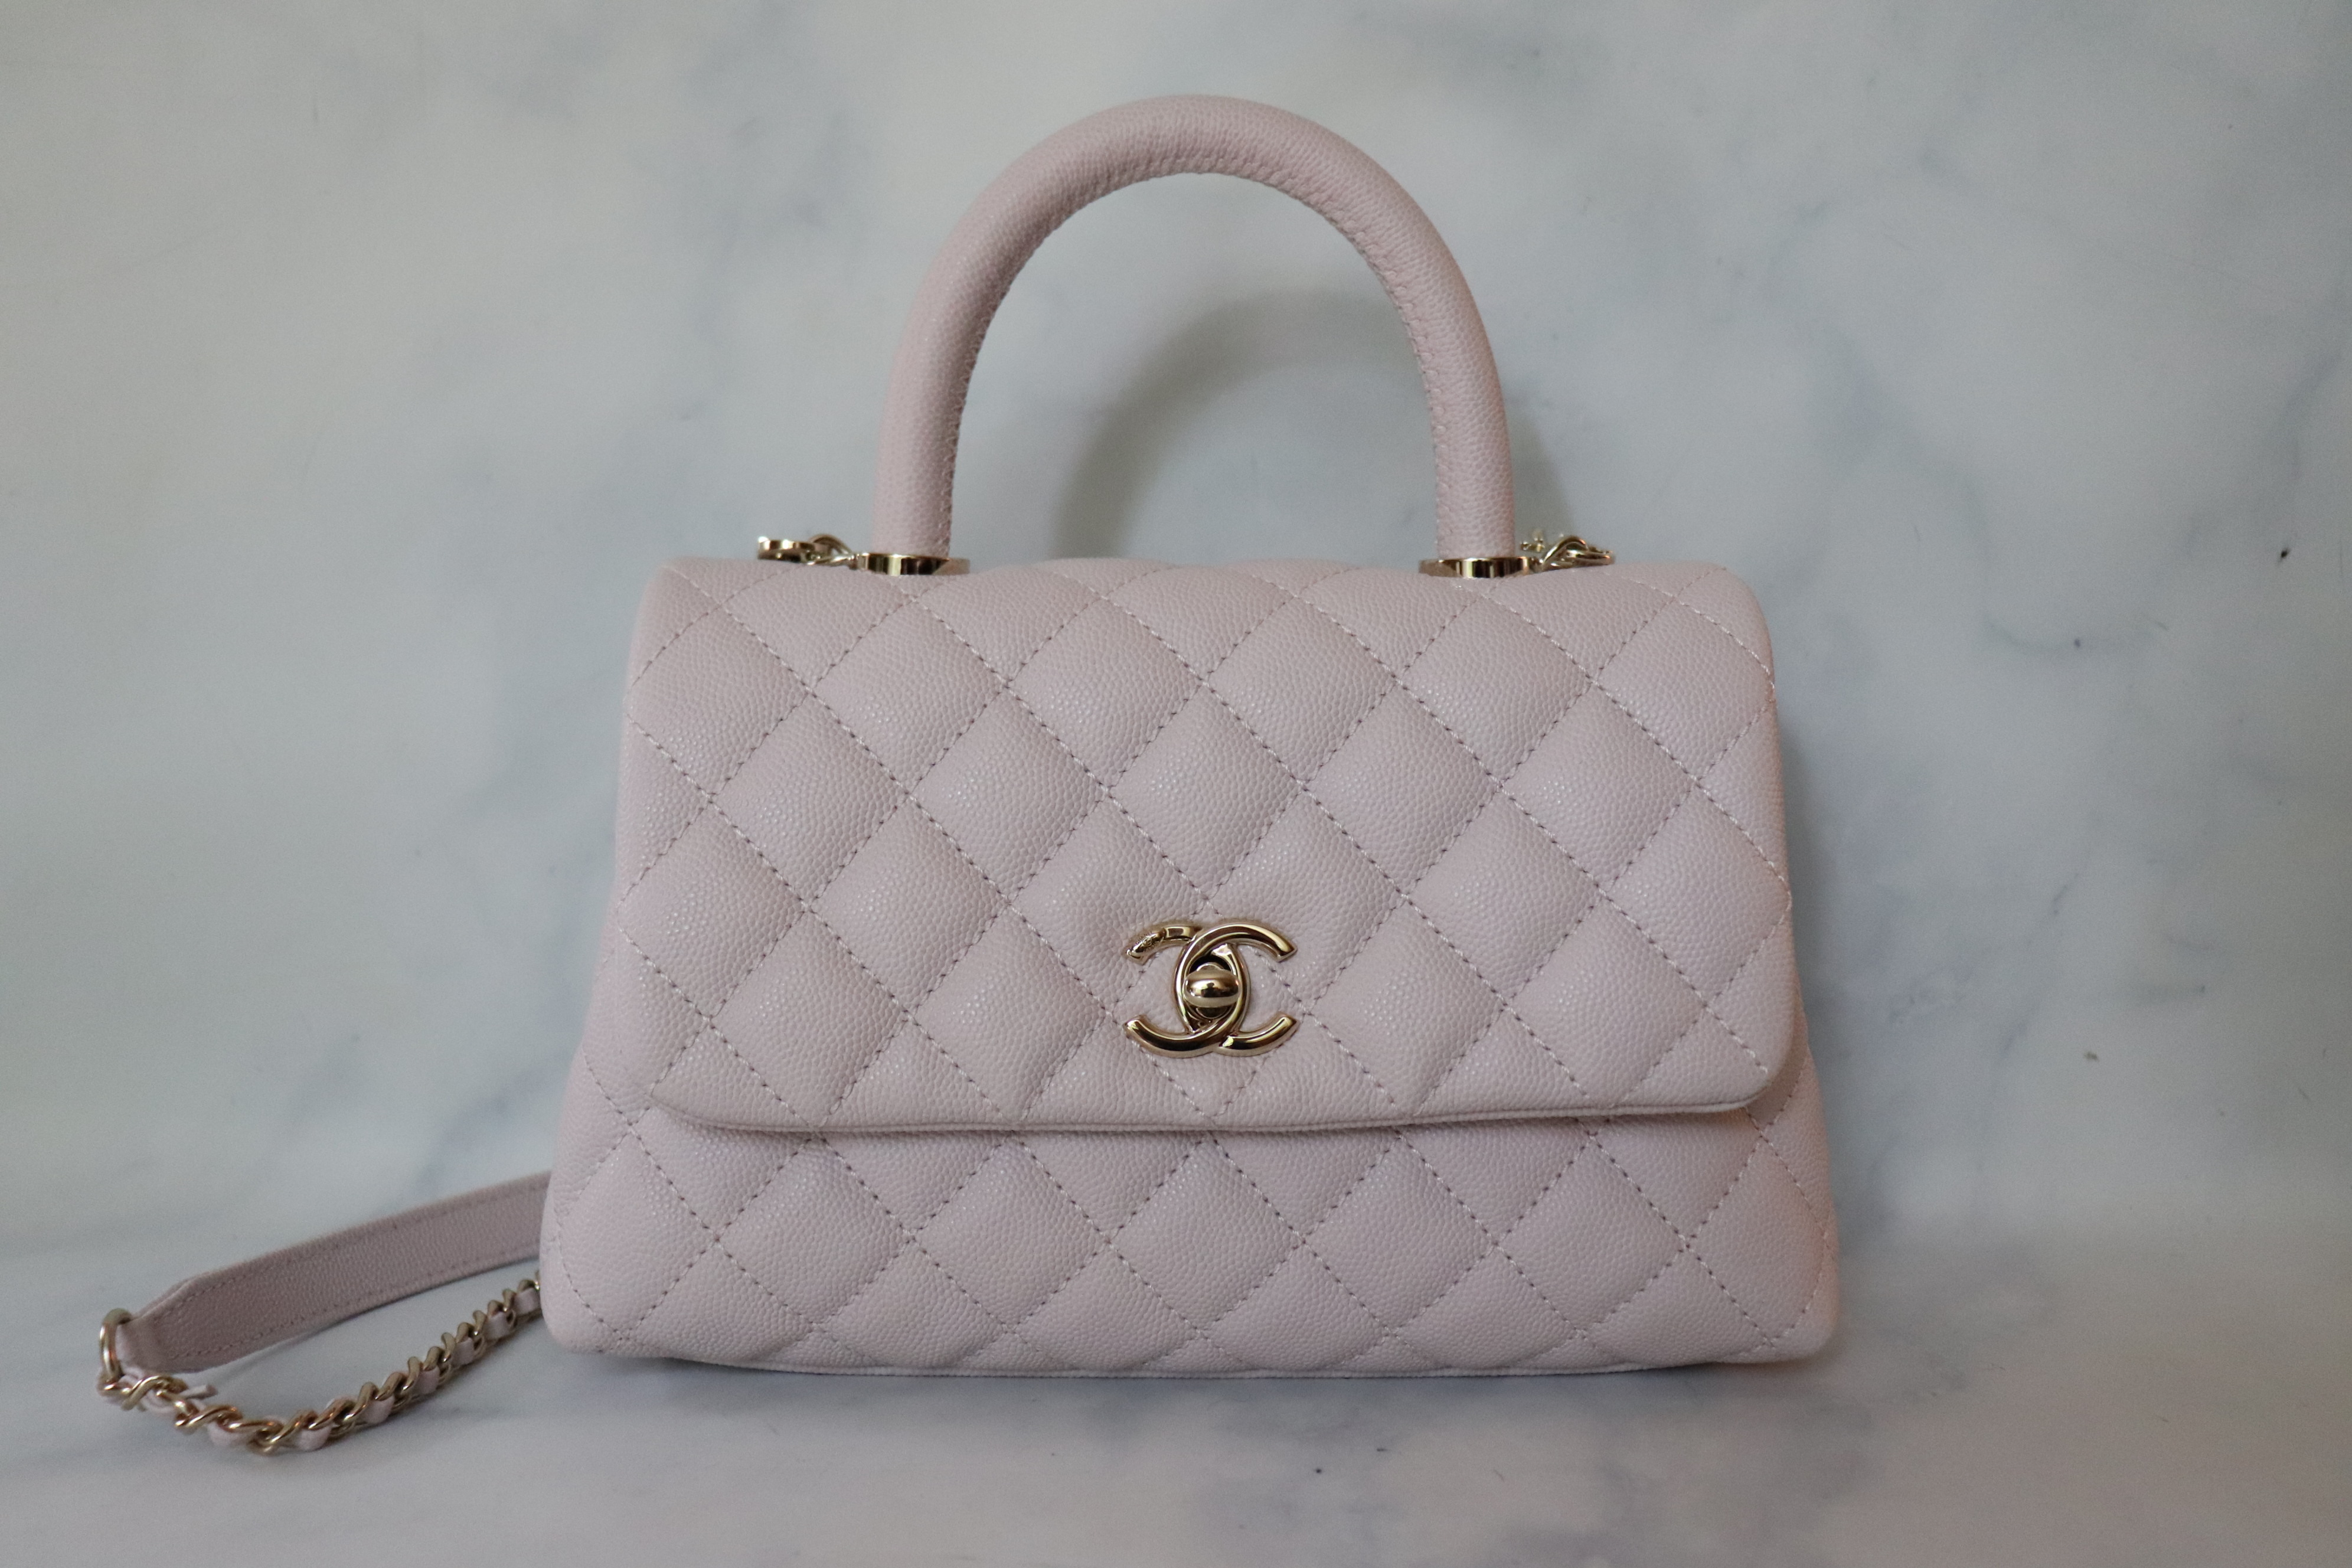 Chanel Coco Handle Mini, Lilac Caviar Leather with Gold Hardware, New in Box